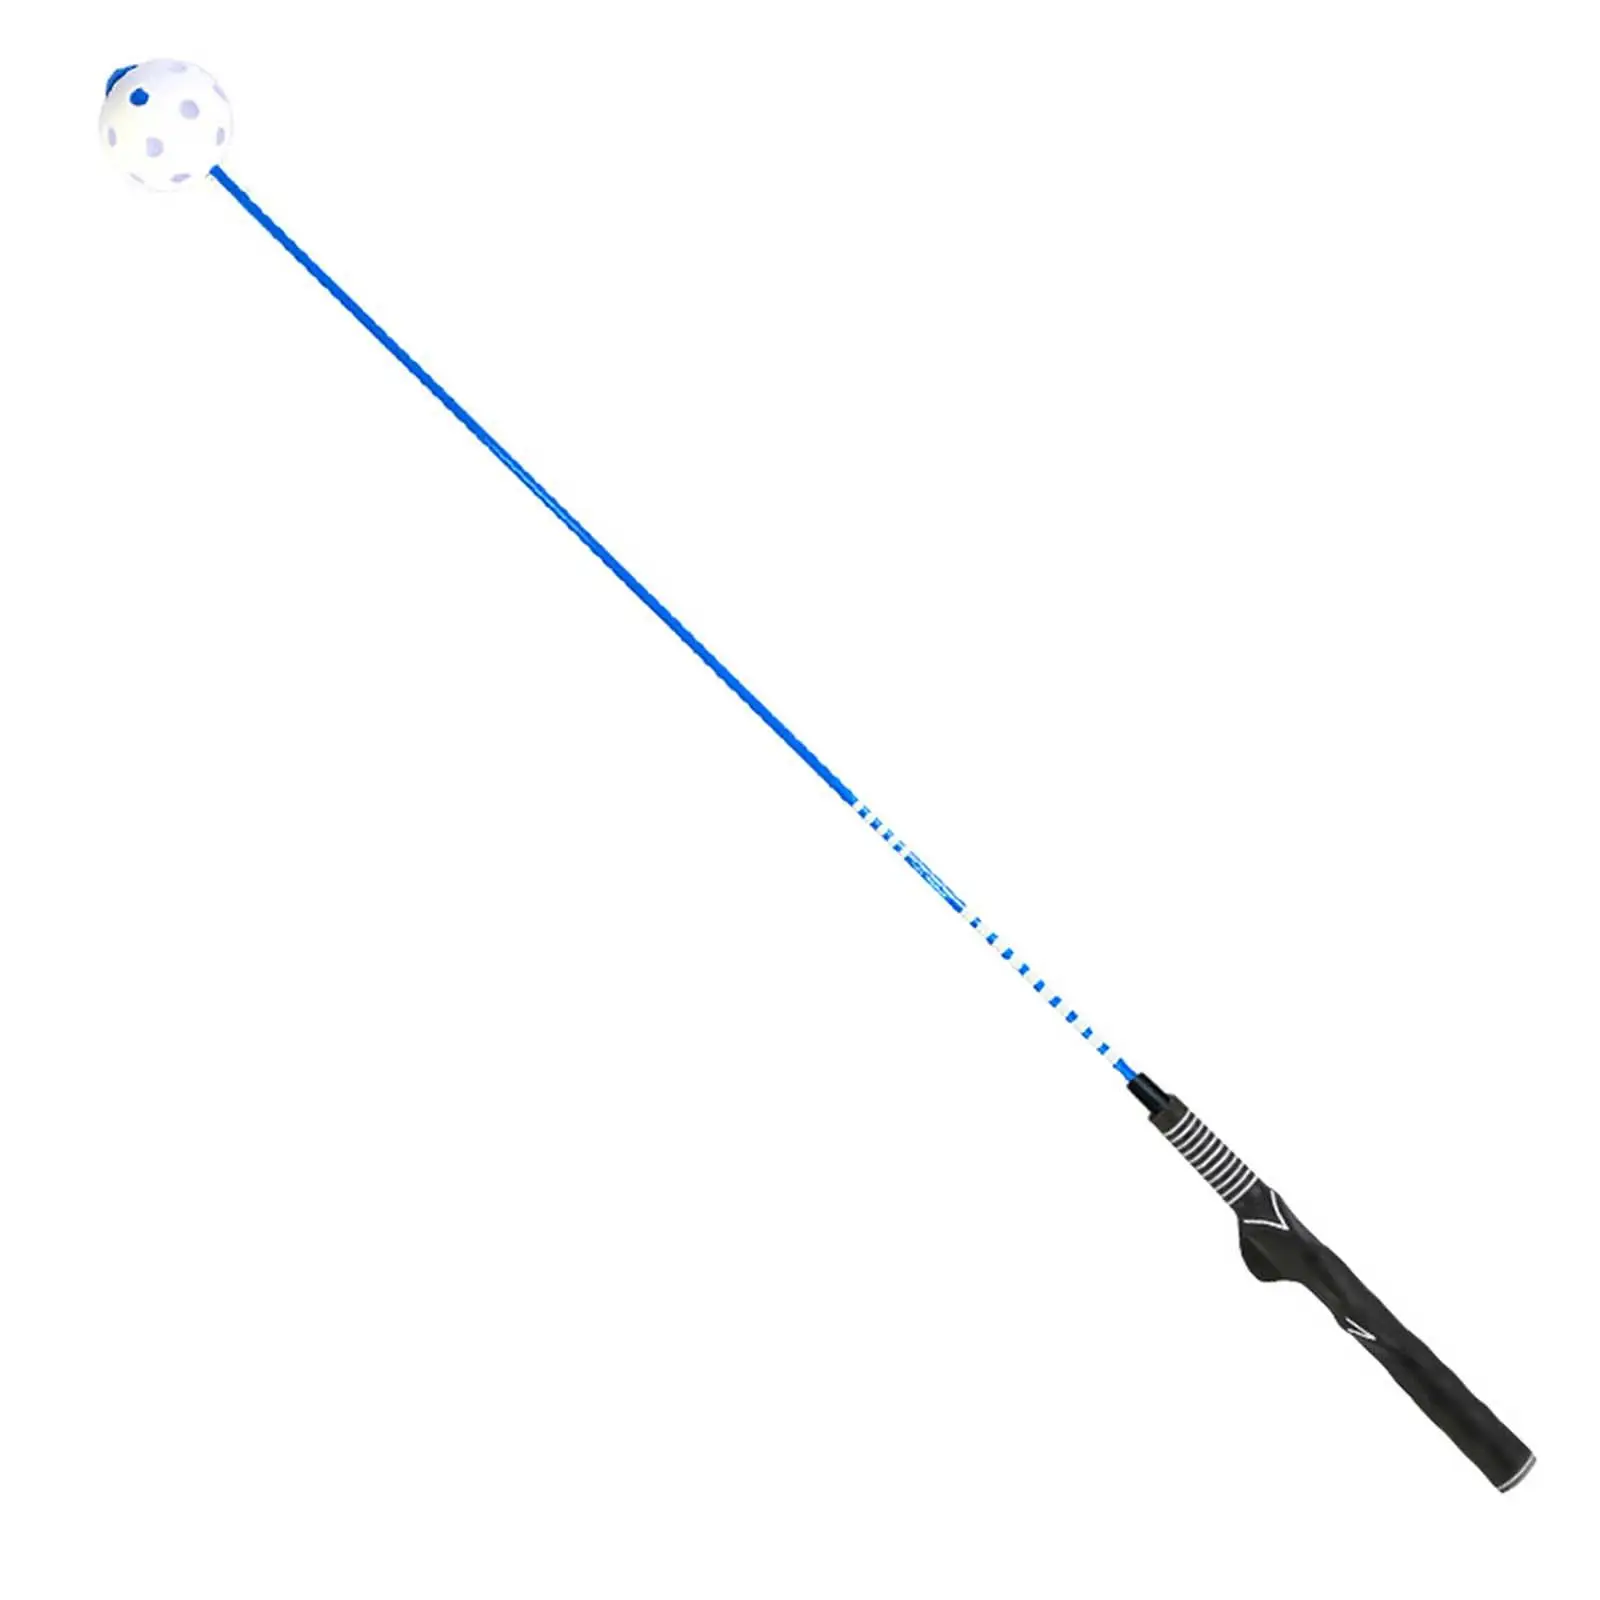 Golf Swing Trainer, Golf Club Equipment Flexible Rod Portable Improving Gesture Golf Training Aid for Practice Exercise